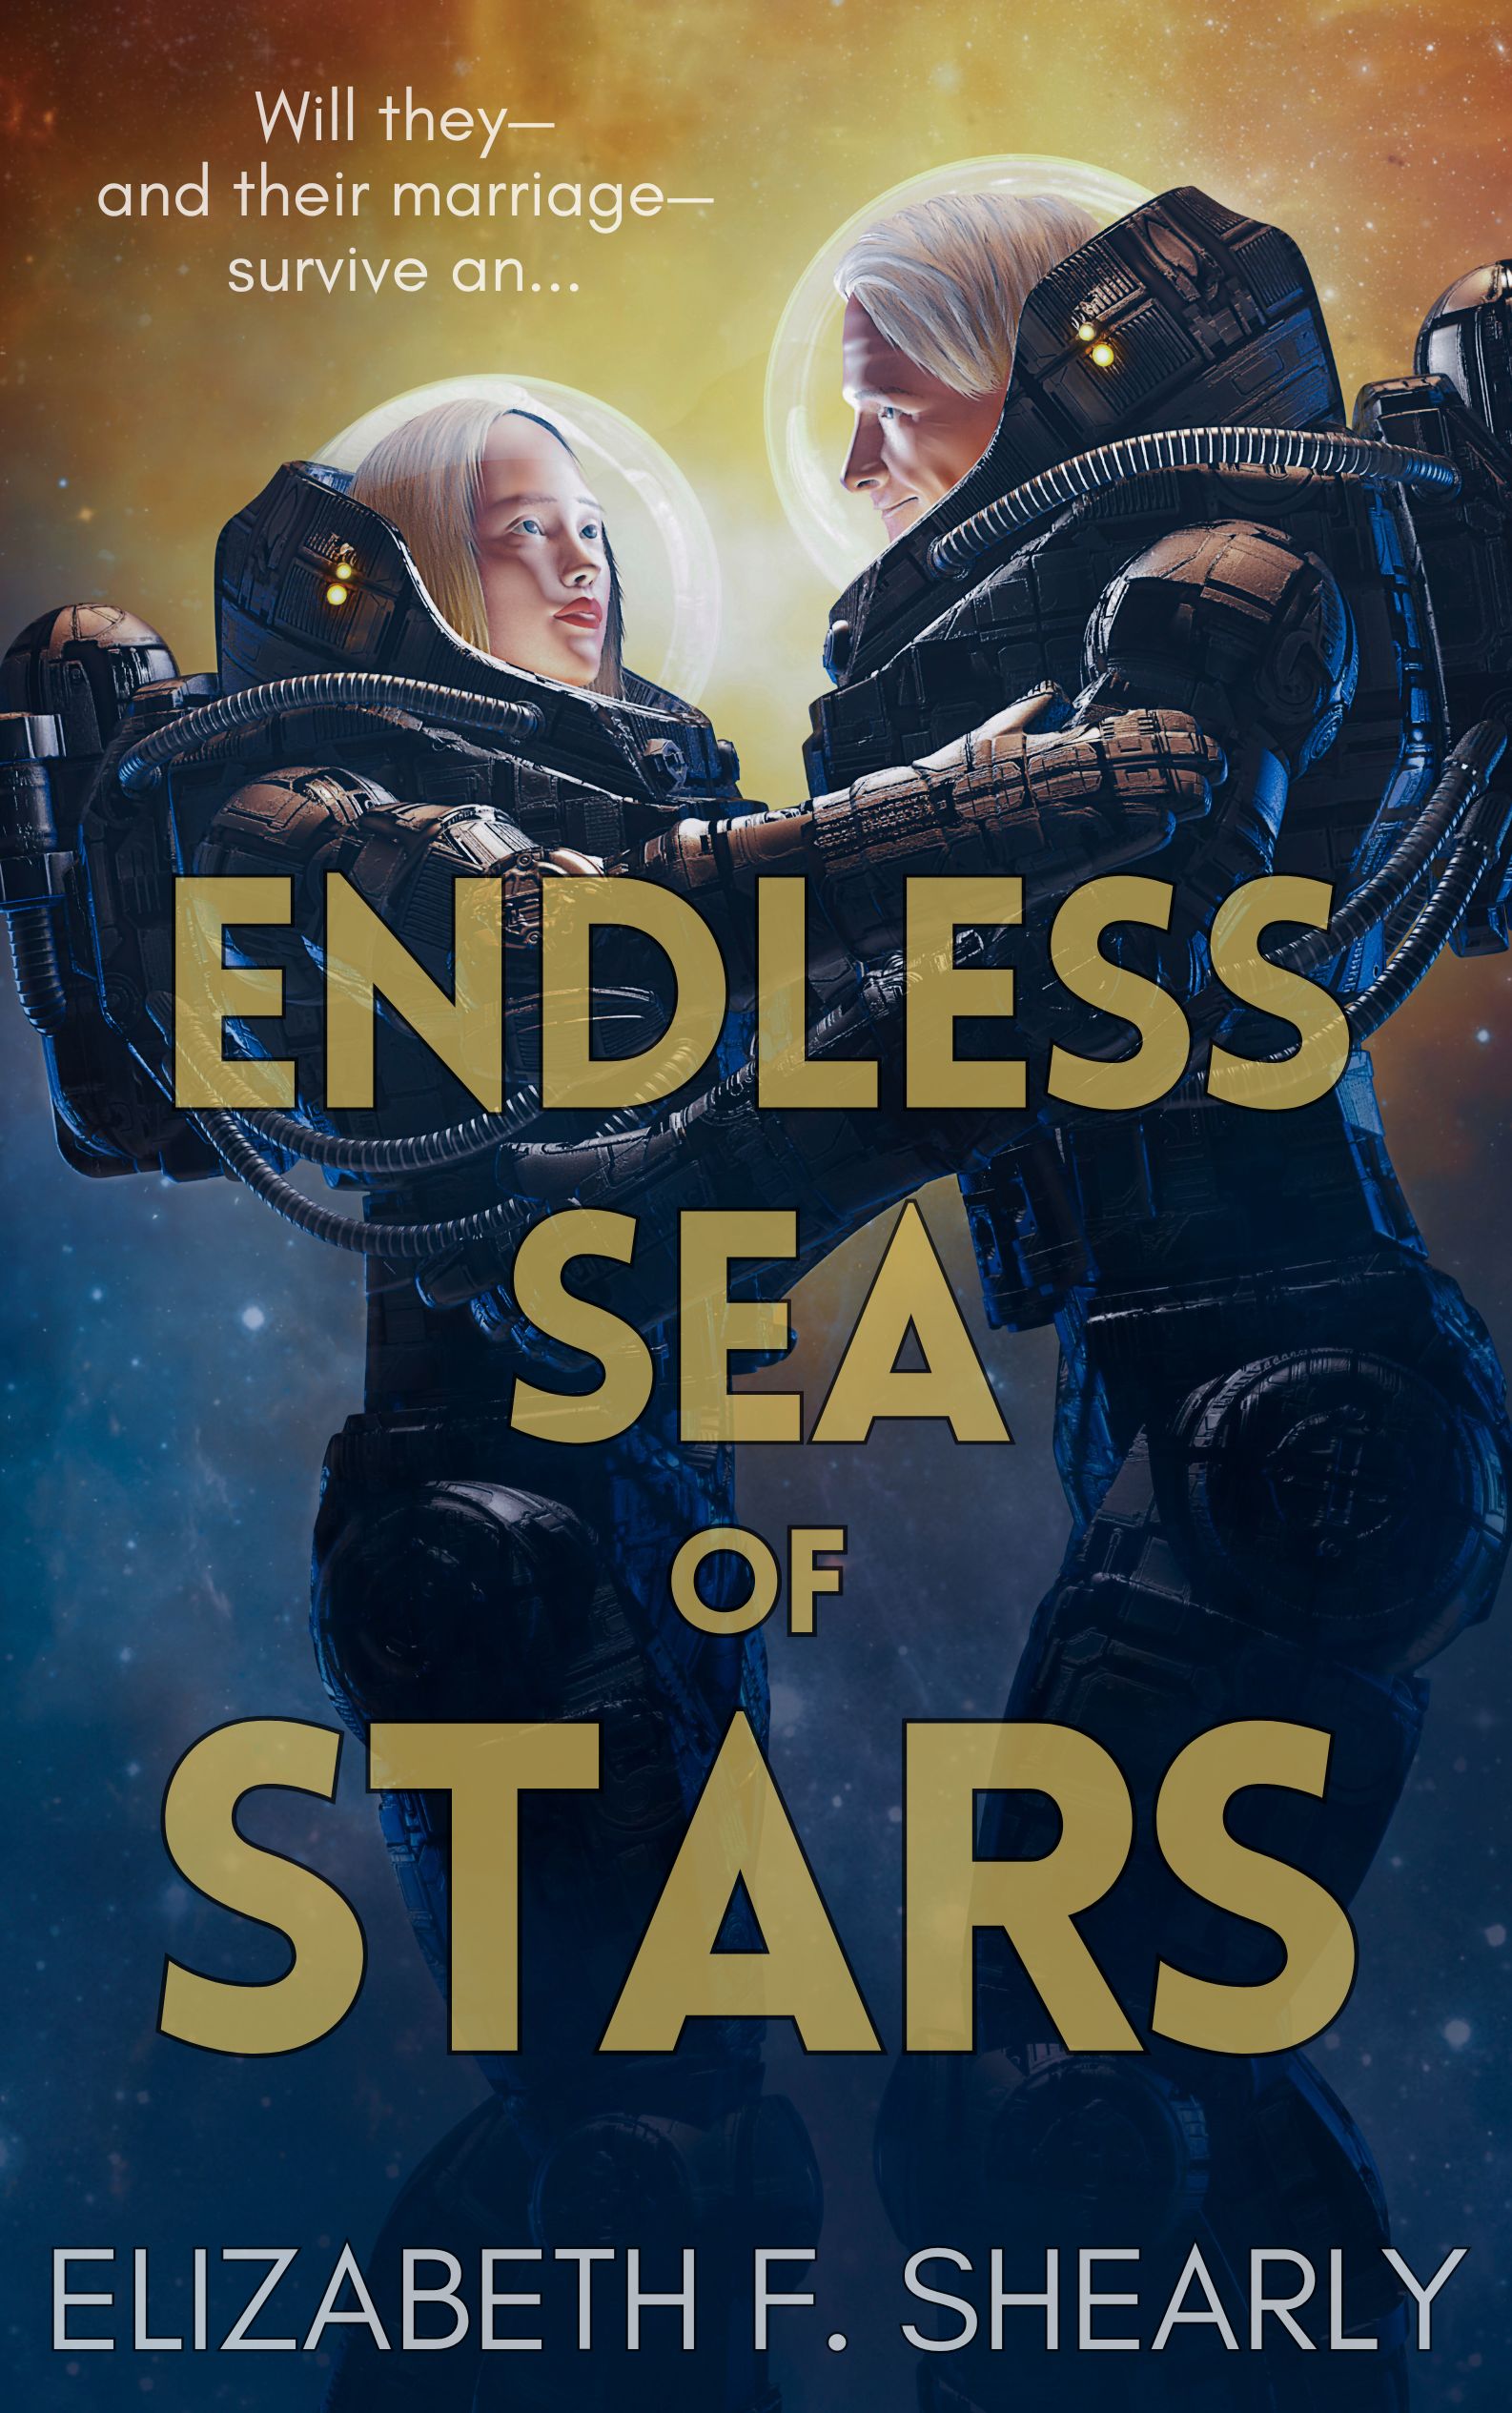 Endless Sea of Stars by Elizabeth F. Shearly released 10 March 2023